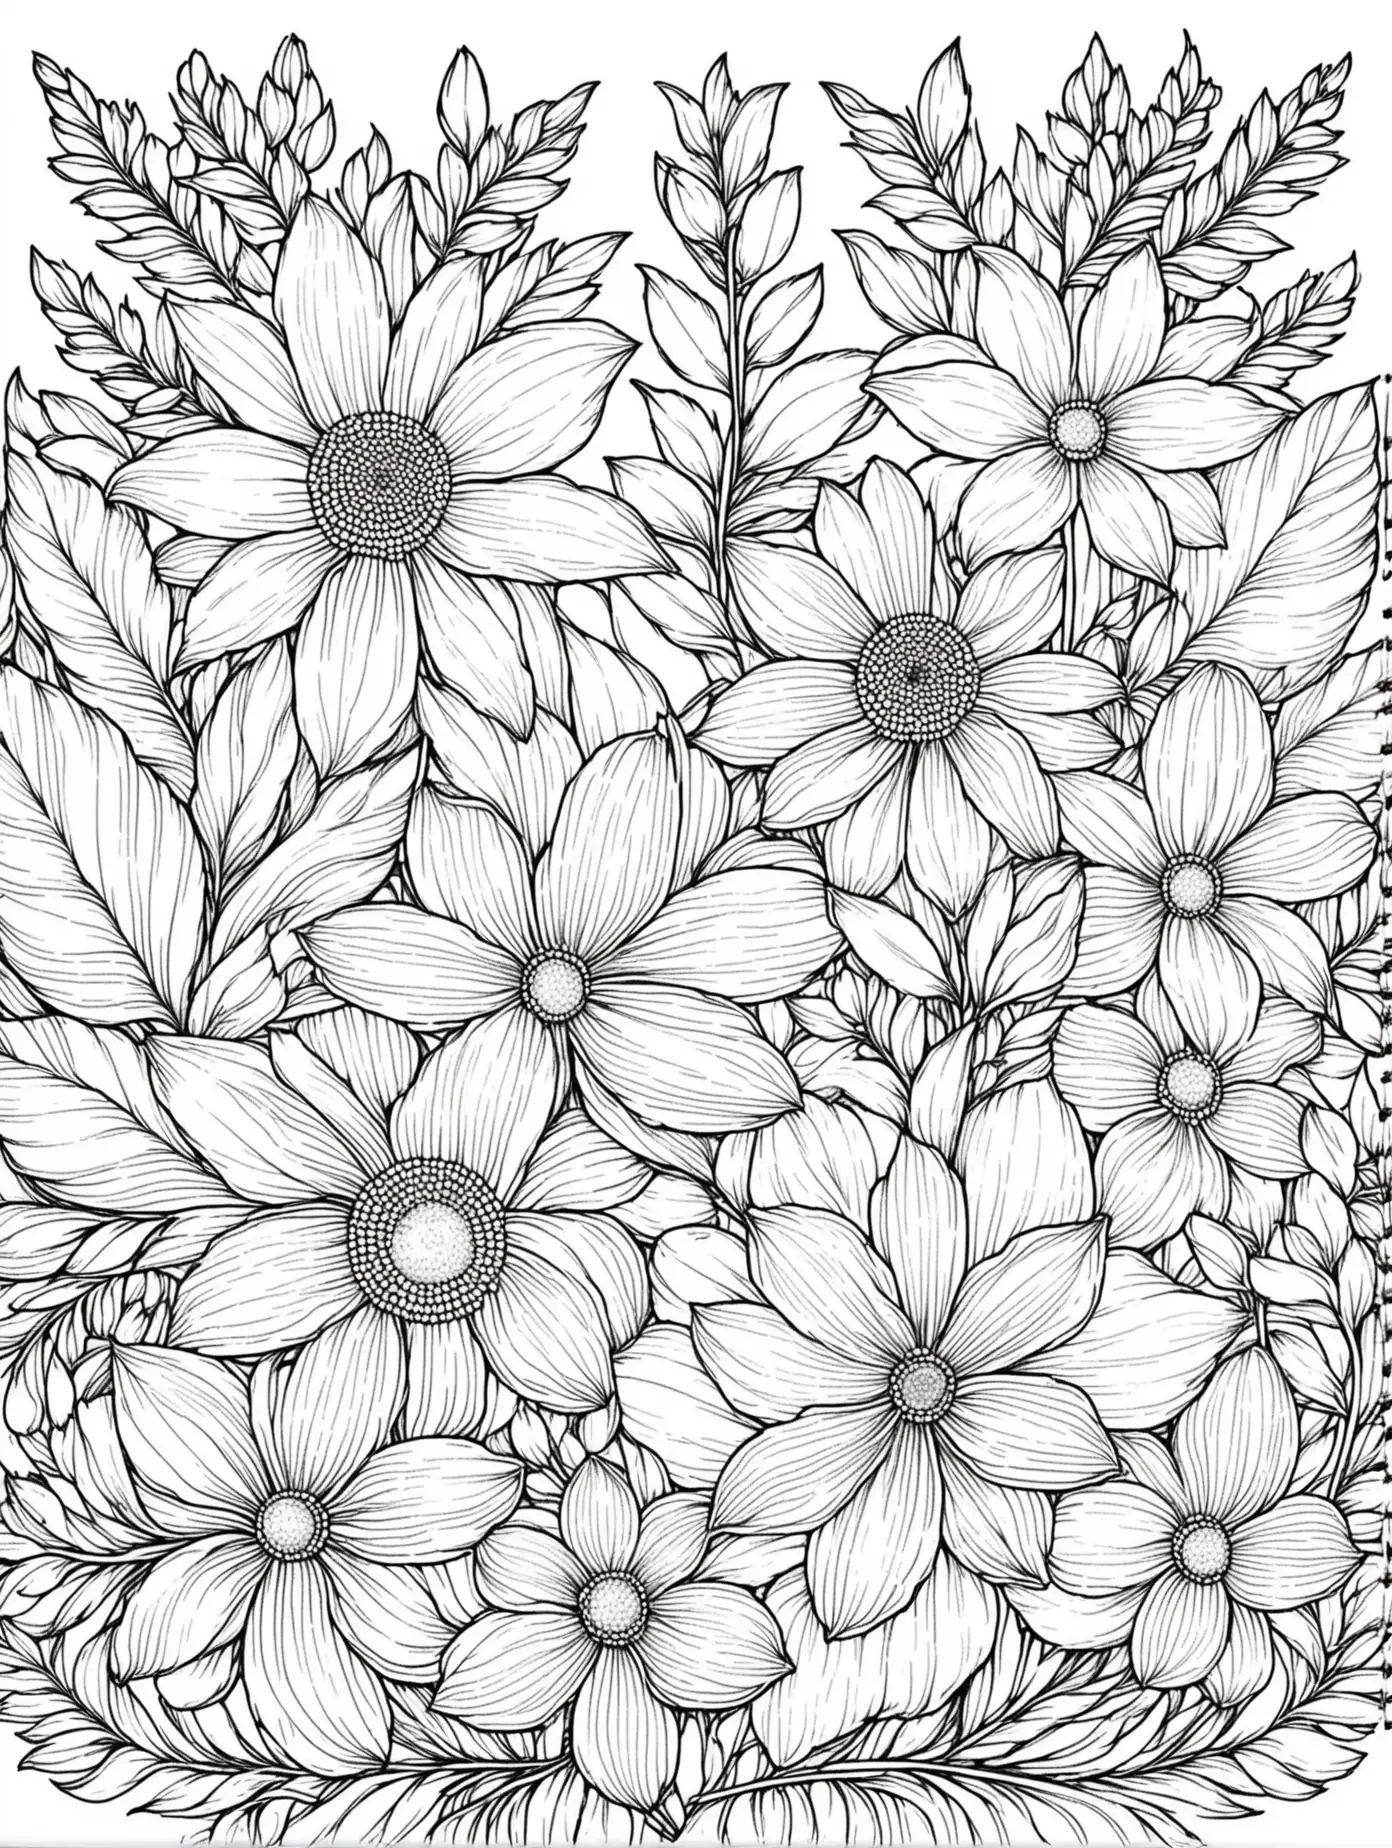 Stylized Black and Flower Coloring Page with Minimal Details